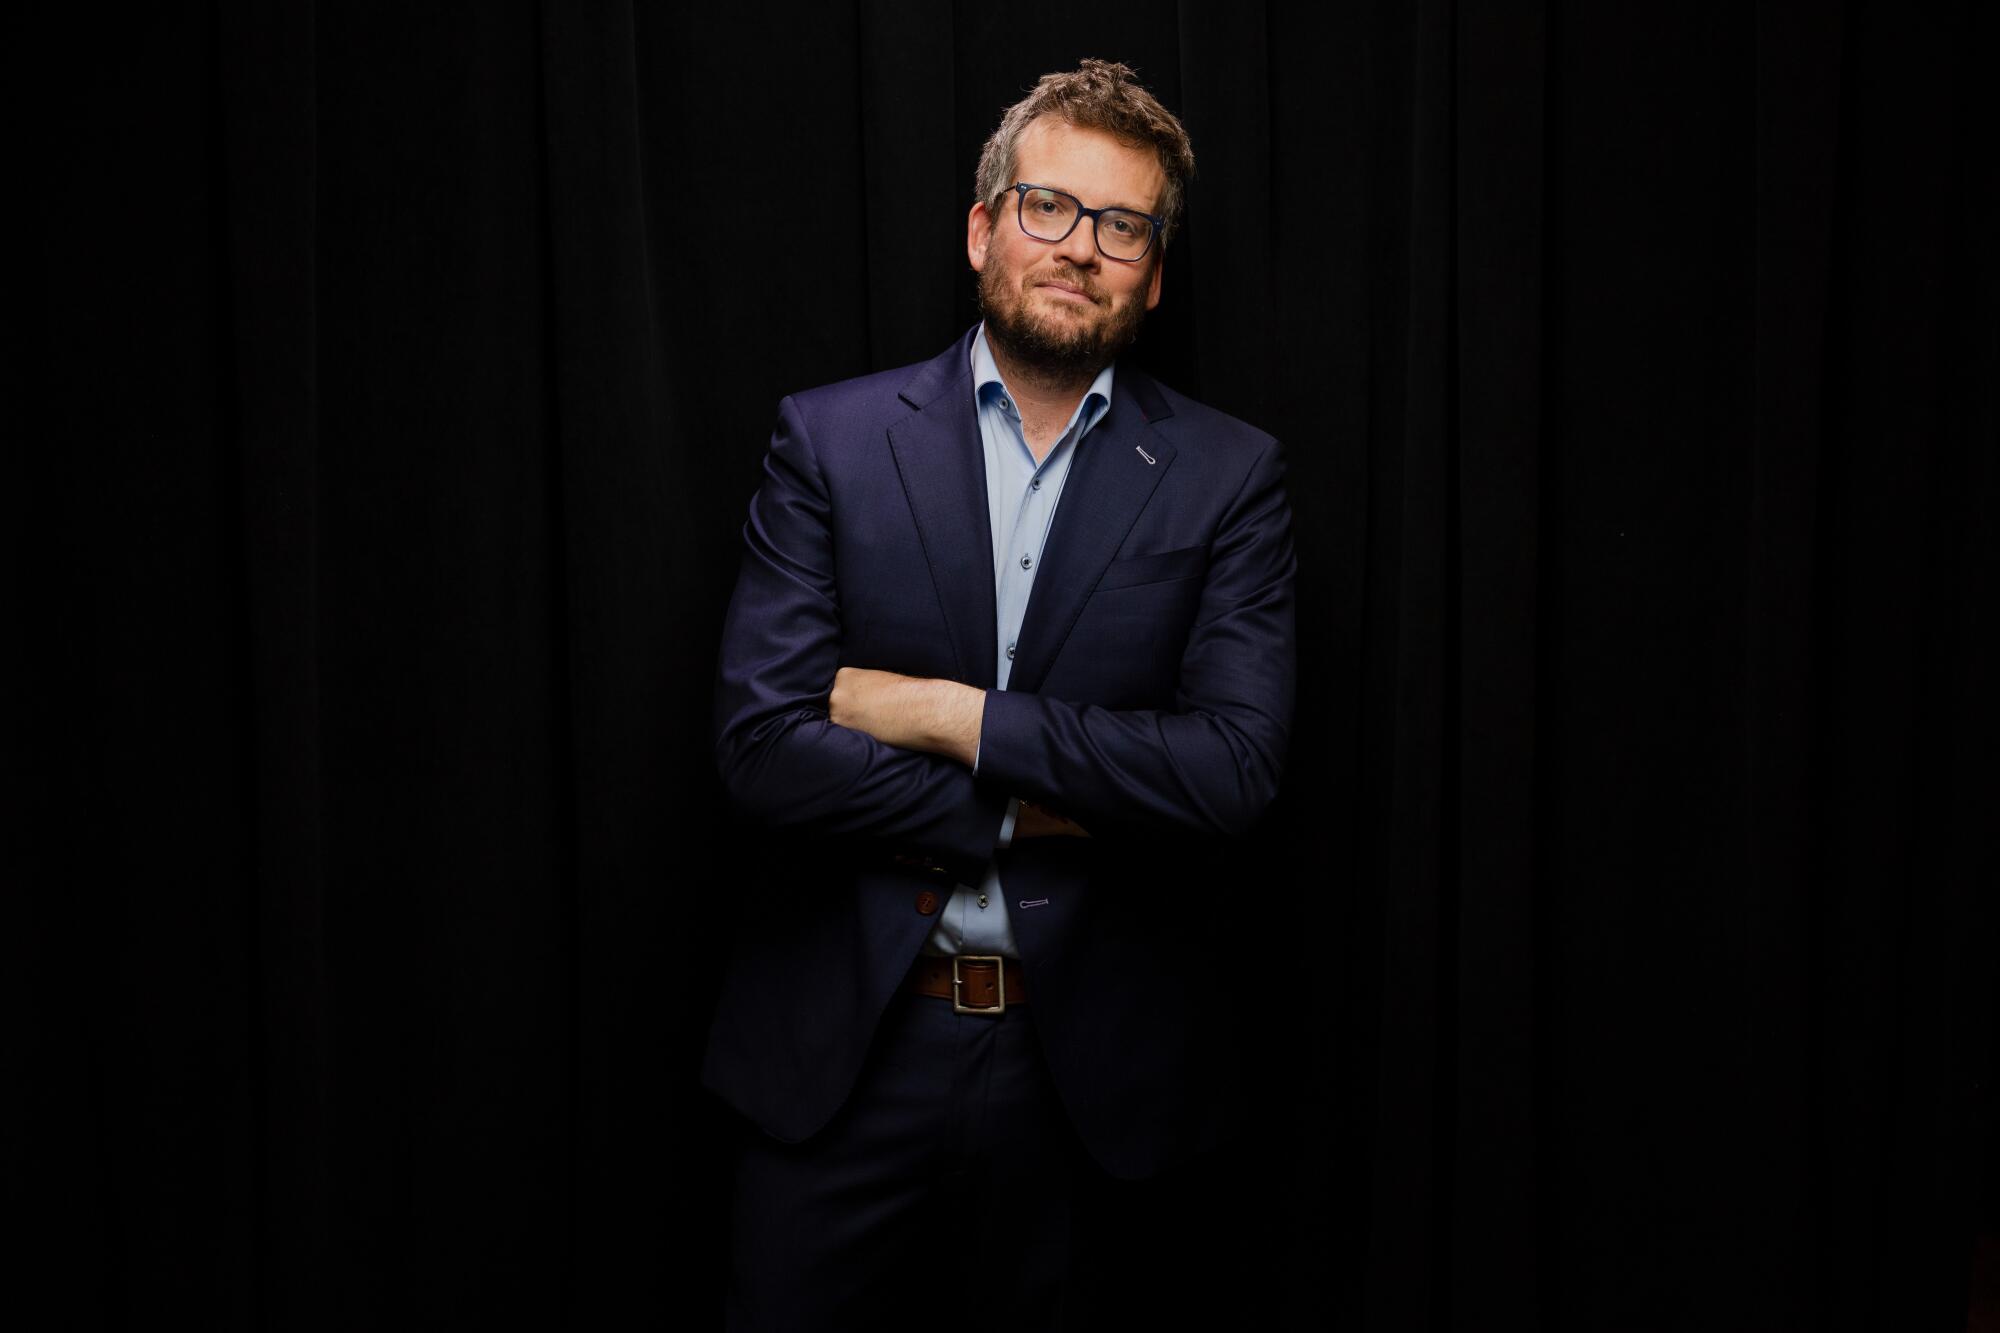 Author John Green in the Los Angeles Times Portrait Studio